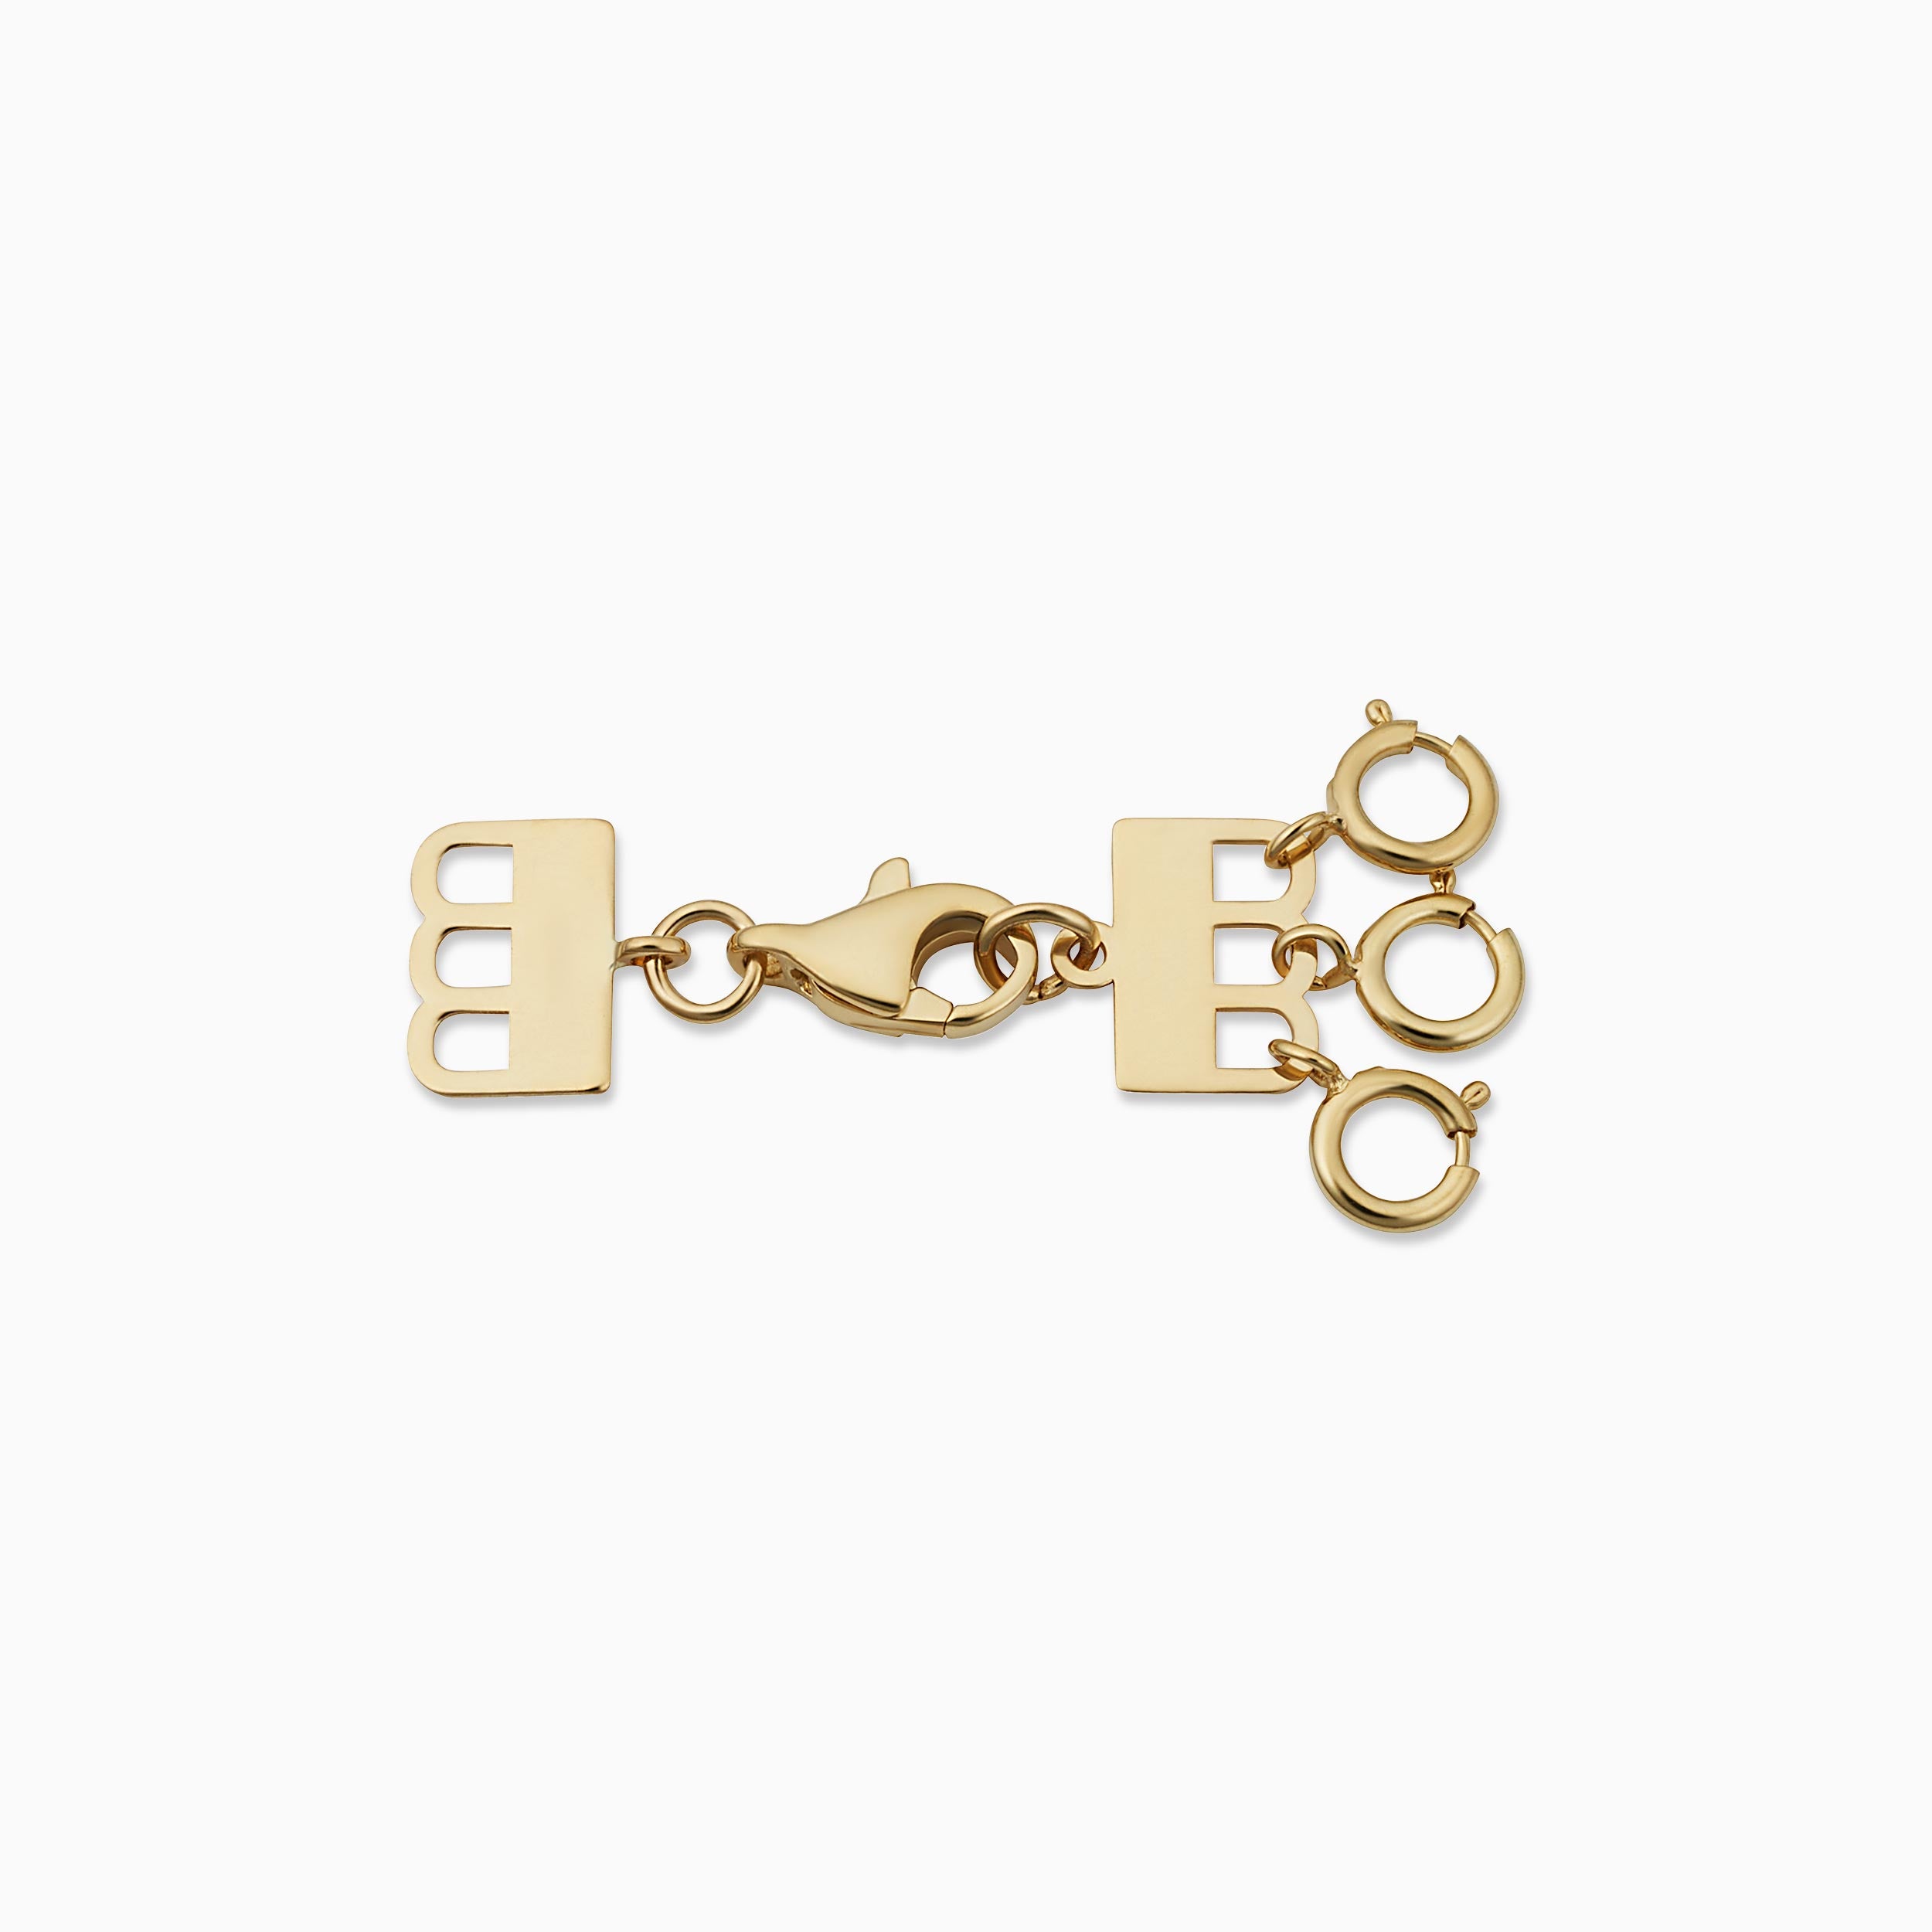 Necklace Layering Clasp – Belle & Ten